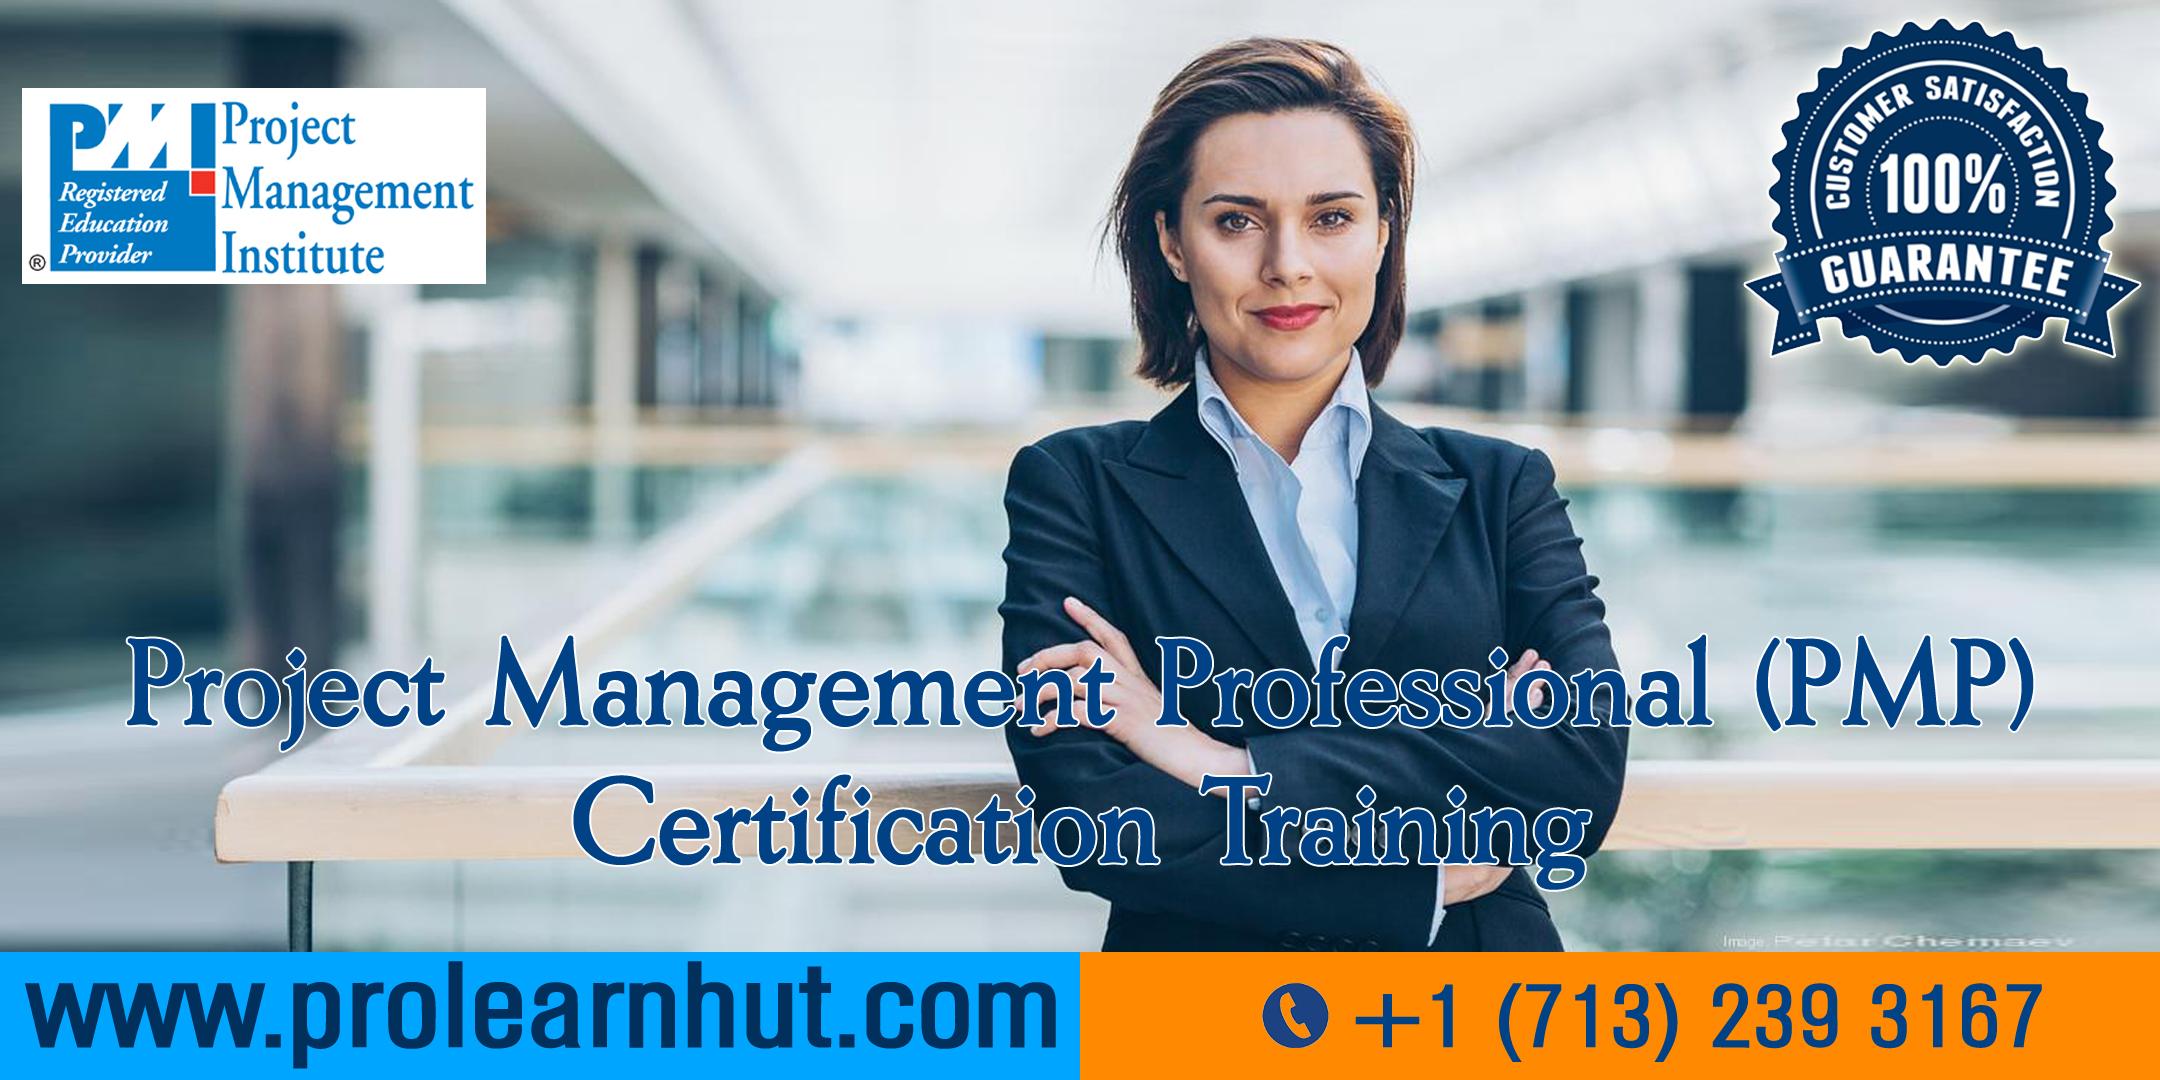 PMP Certification | Project Management Certification| PMP Training in Boston, MA | ProLearnHut